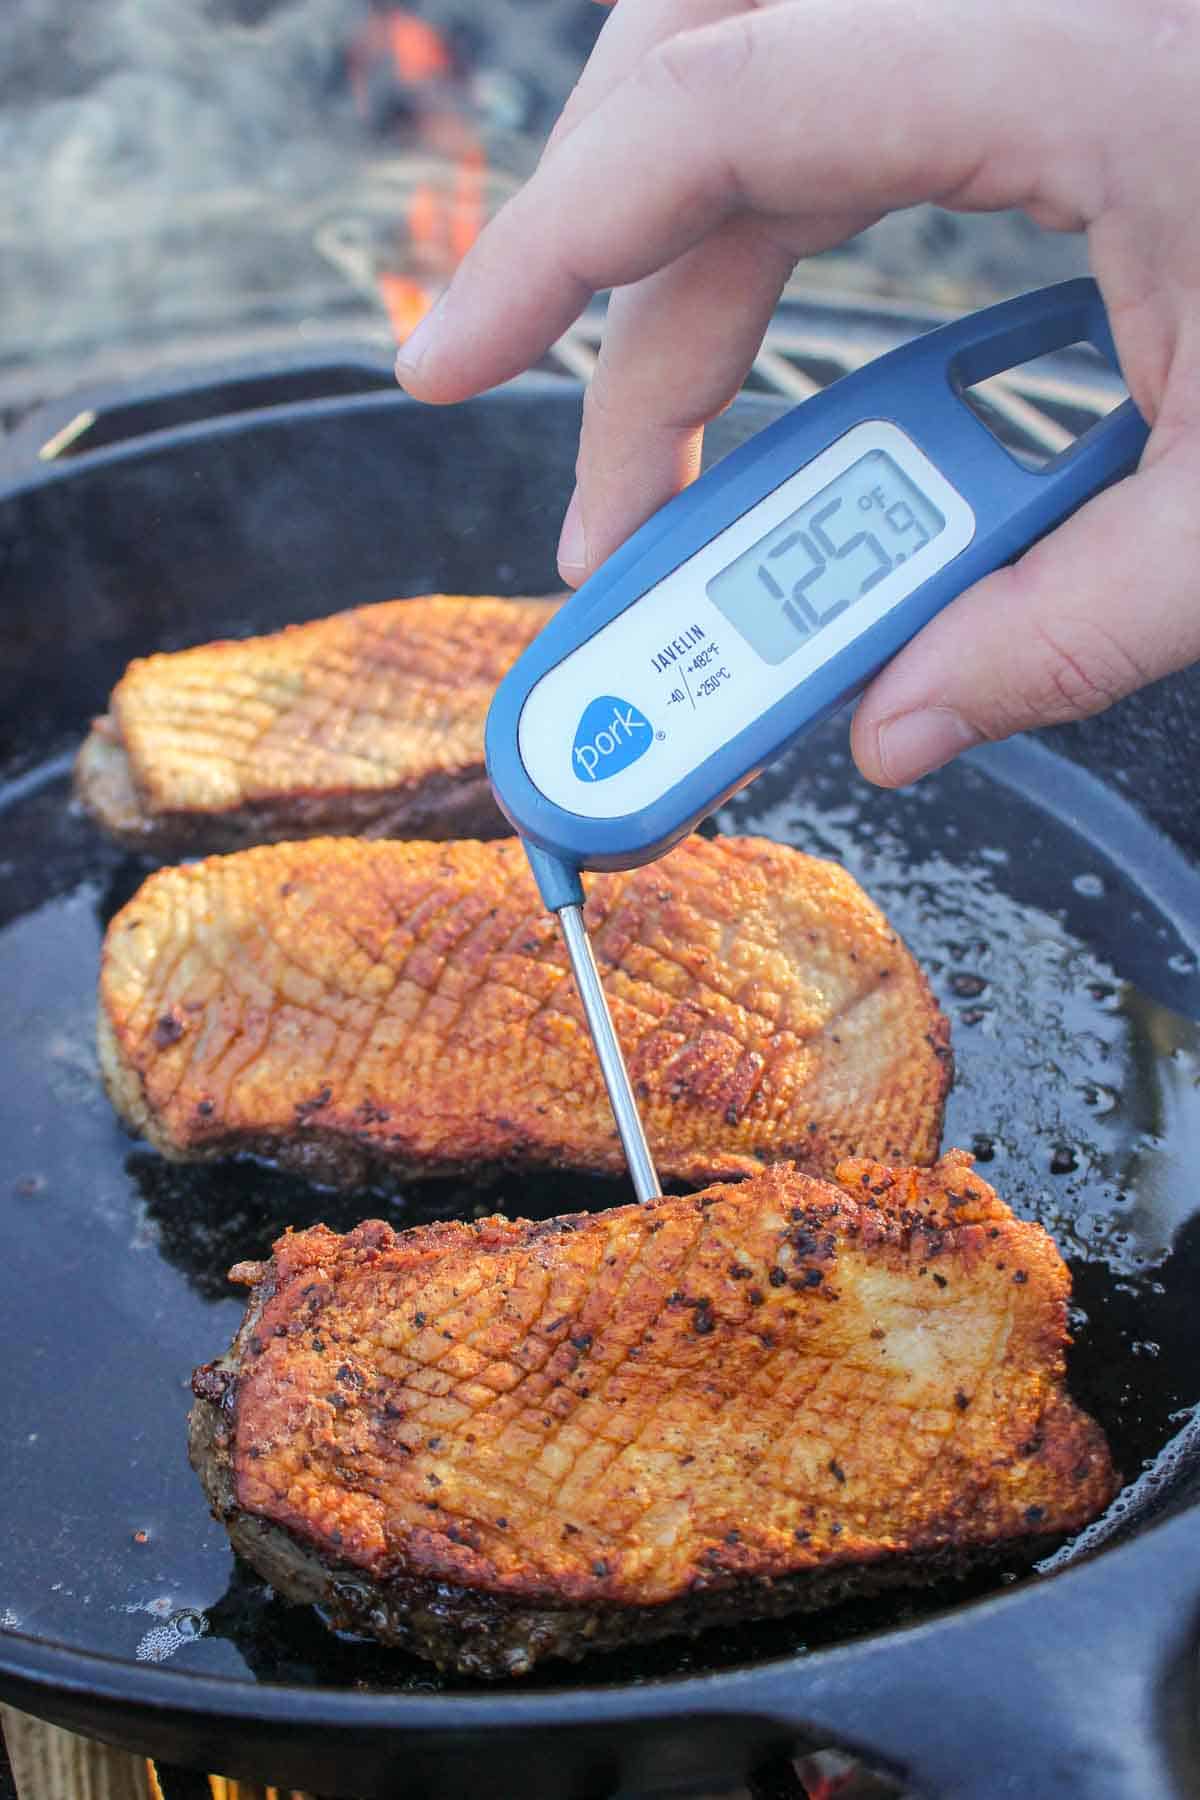 A digital thermometer is used to check the internal temperature of the duck, aiming for 130 degrees F. 